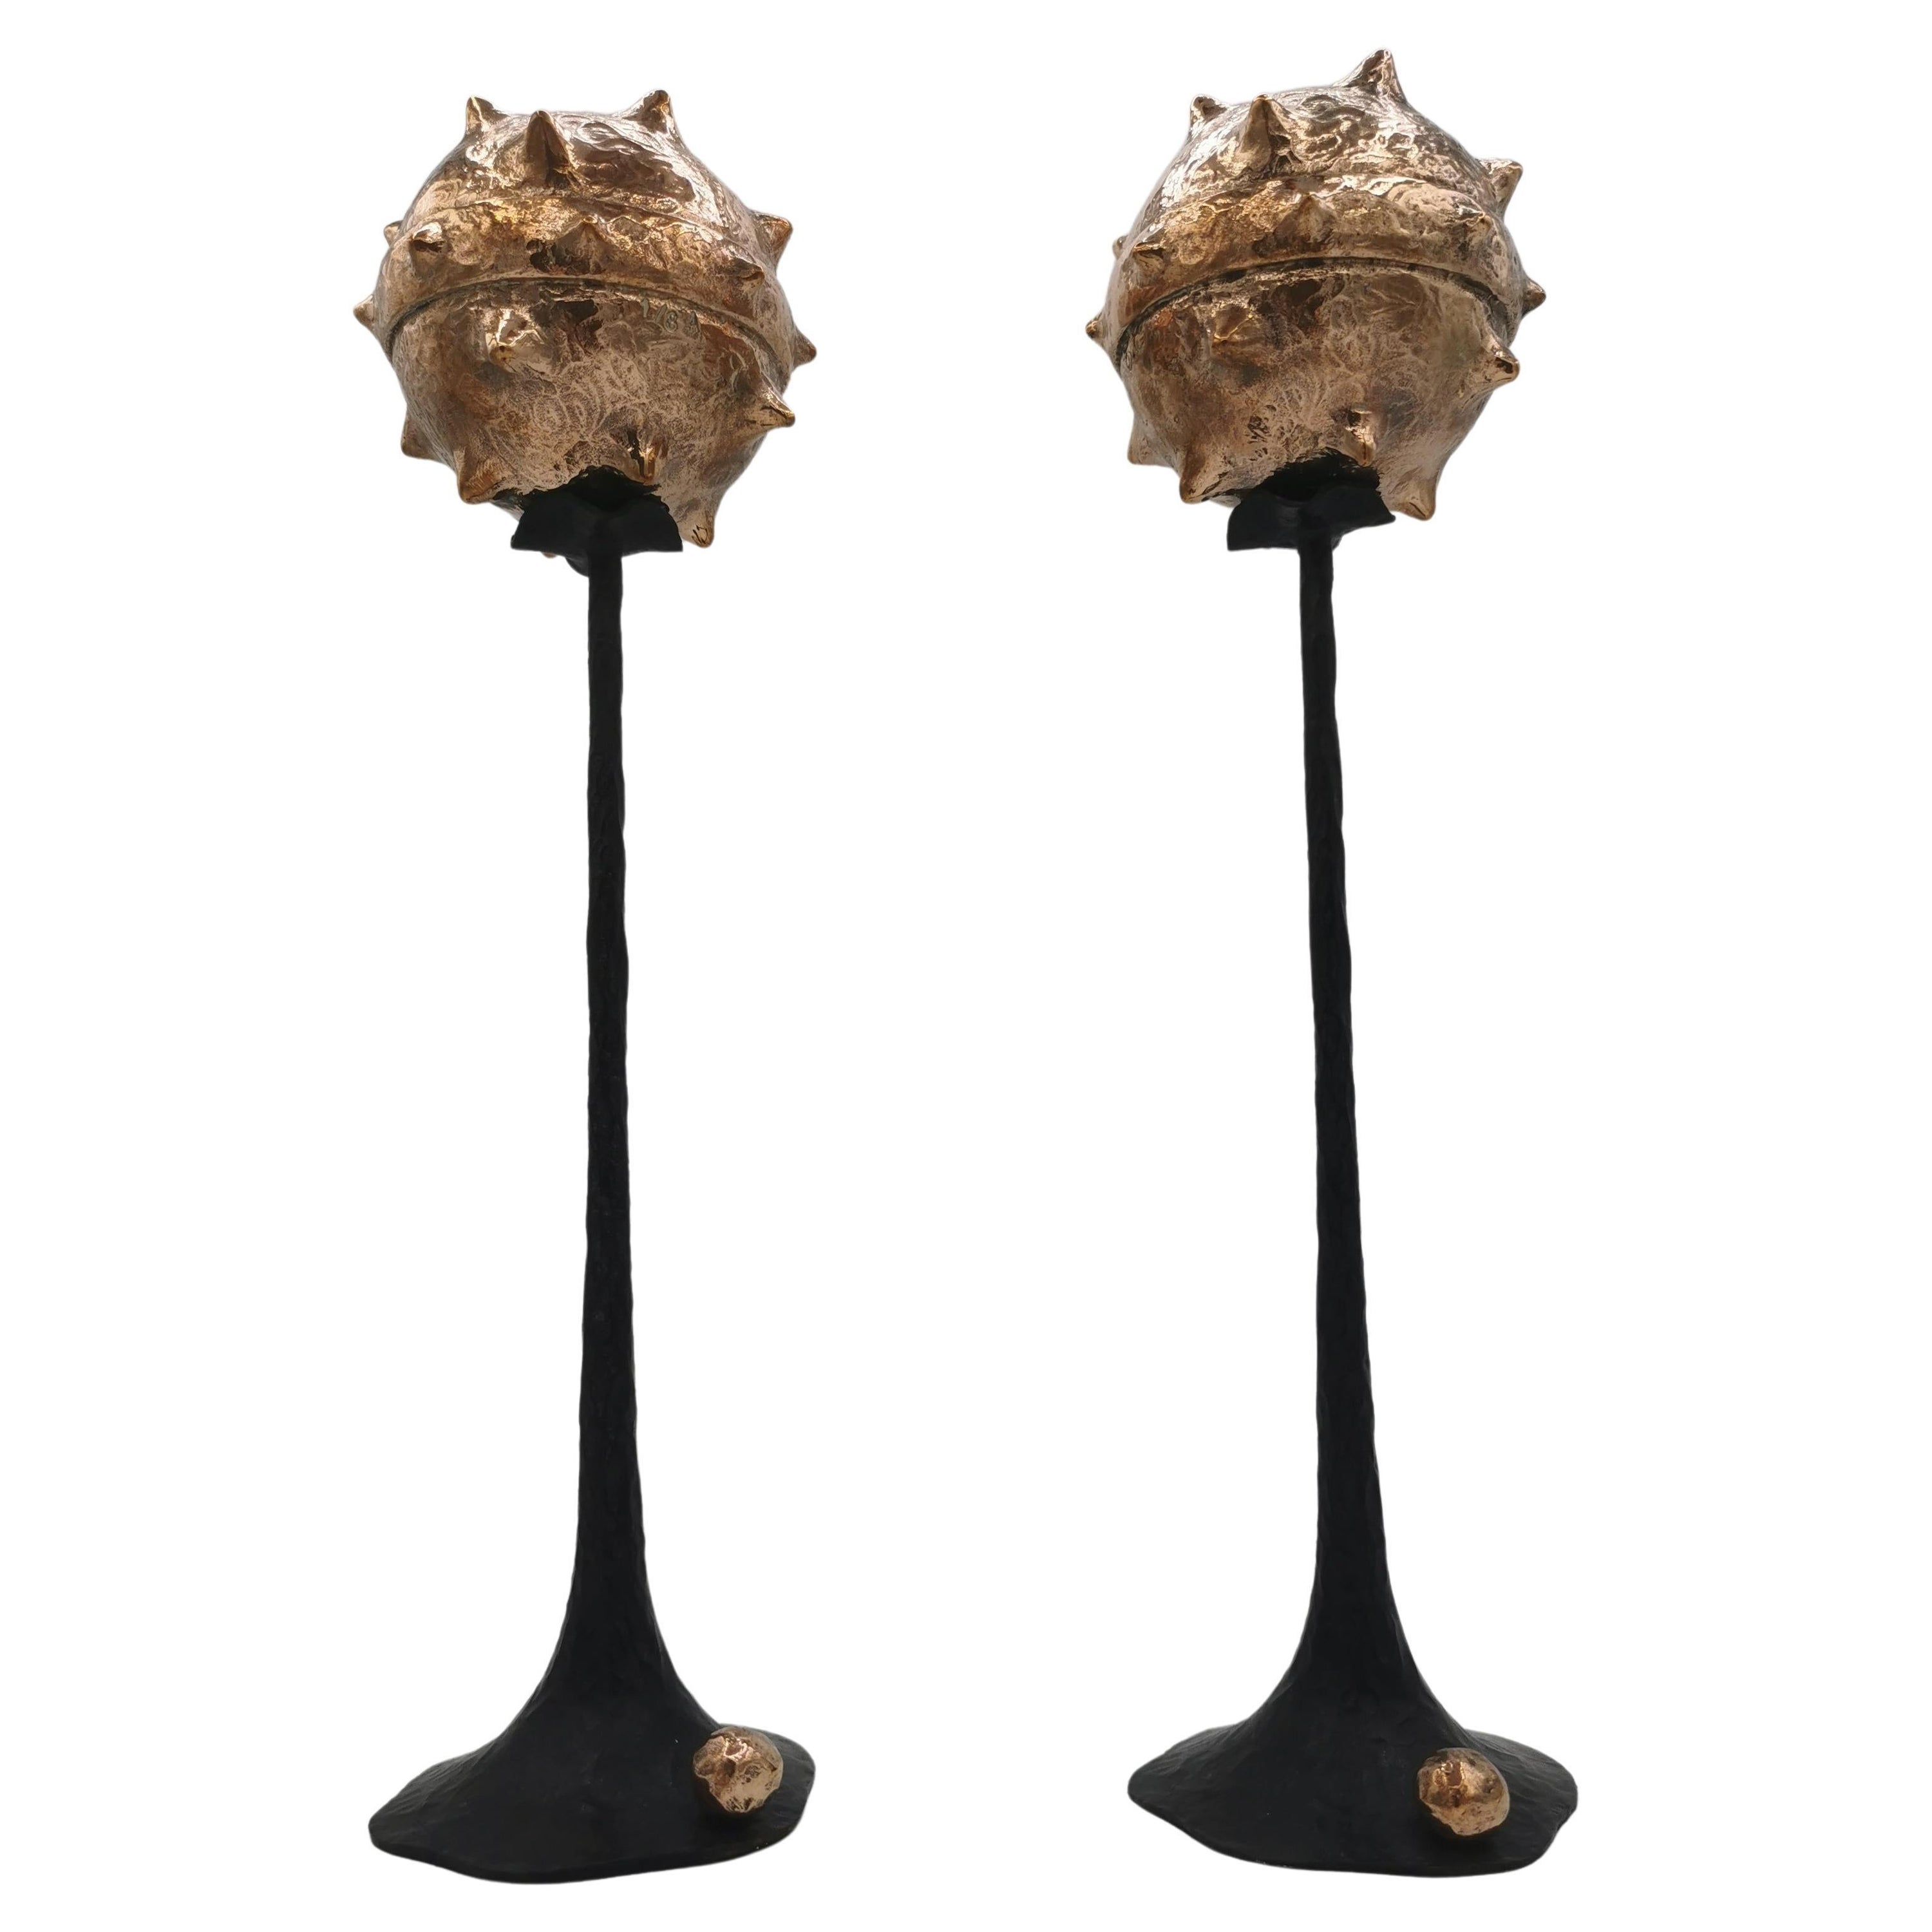 Set of 2 Primus Big Decorative Objects by Emanuele Colombi For Sale